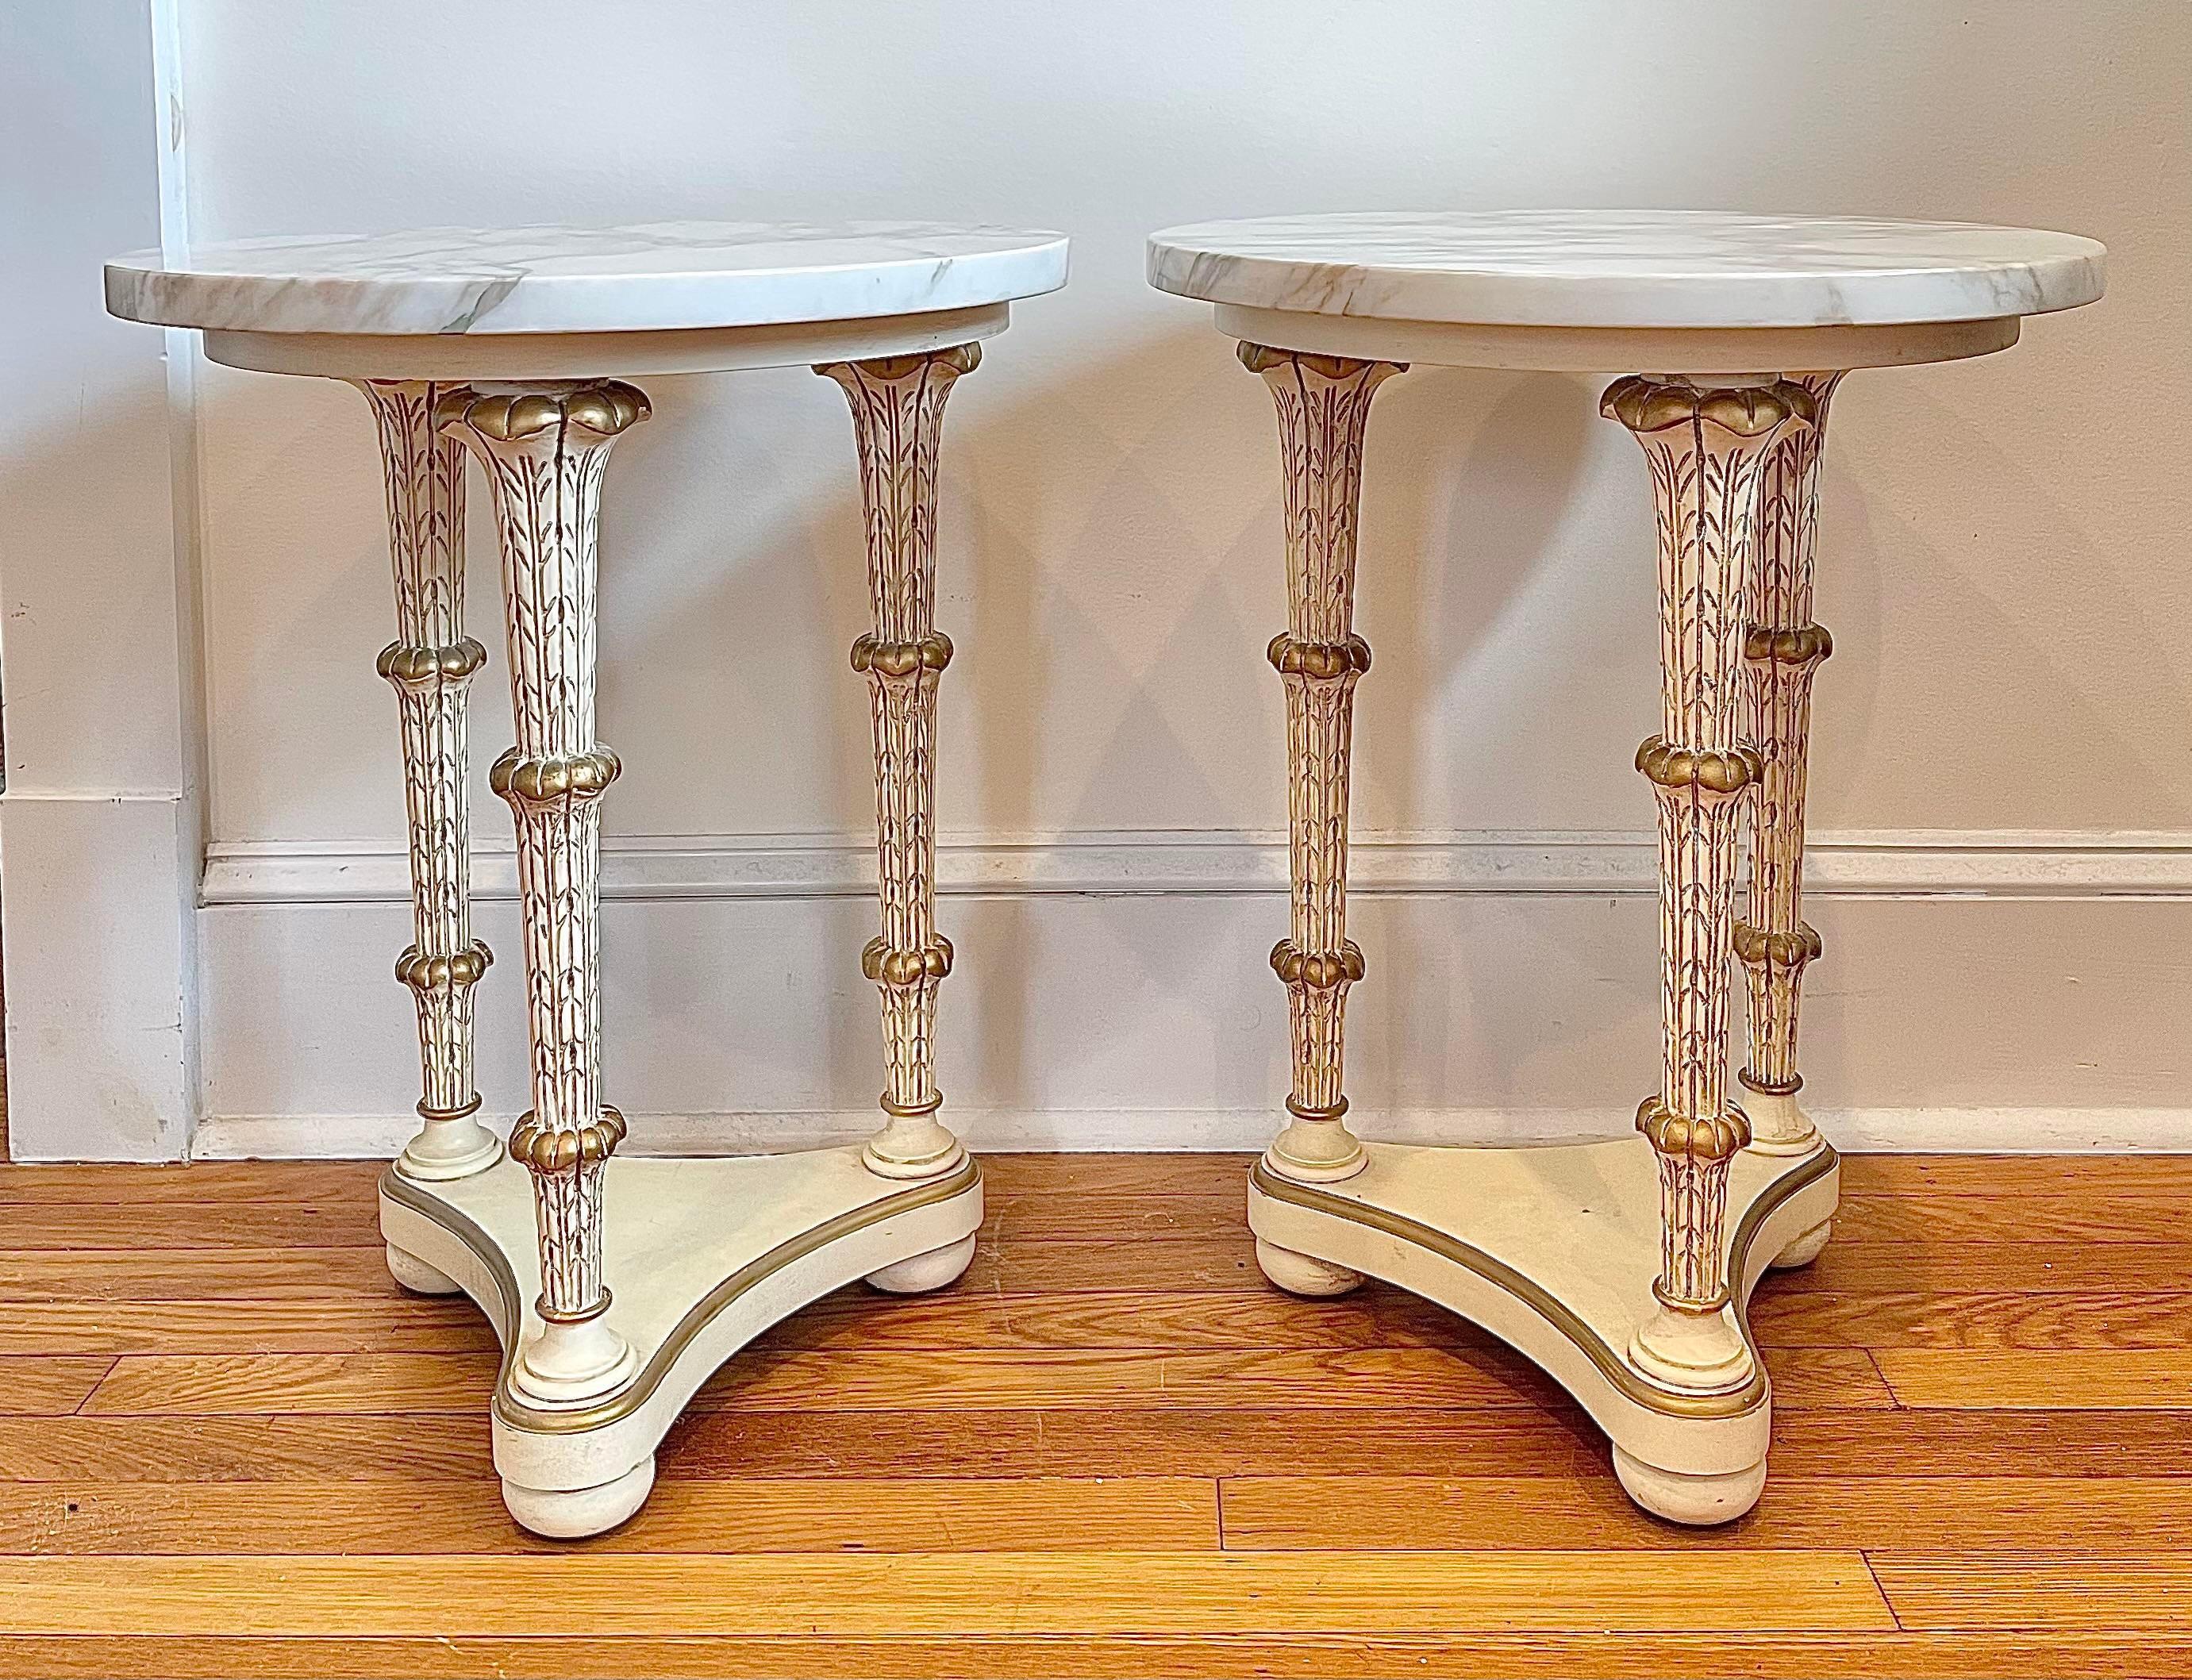 Beautiful pair of Neoclassical Gueridon tables. 3 acanthus leaf legs and wonderfully veined marble tops.
Curbside delivery available to NYC/Philly $300